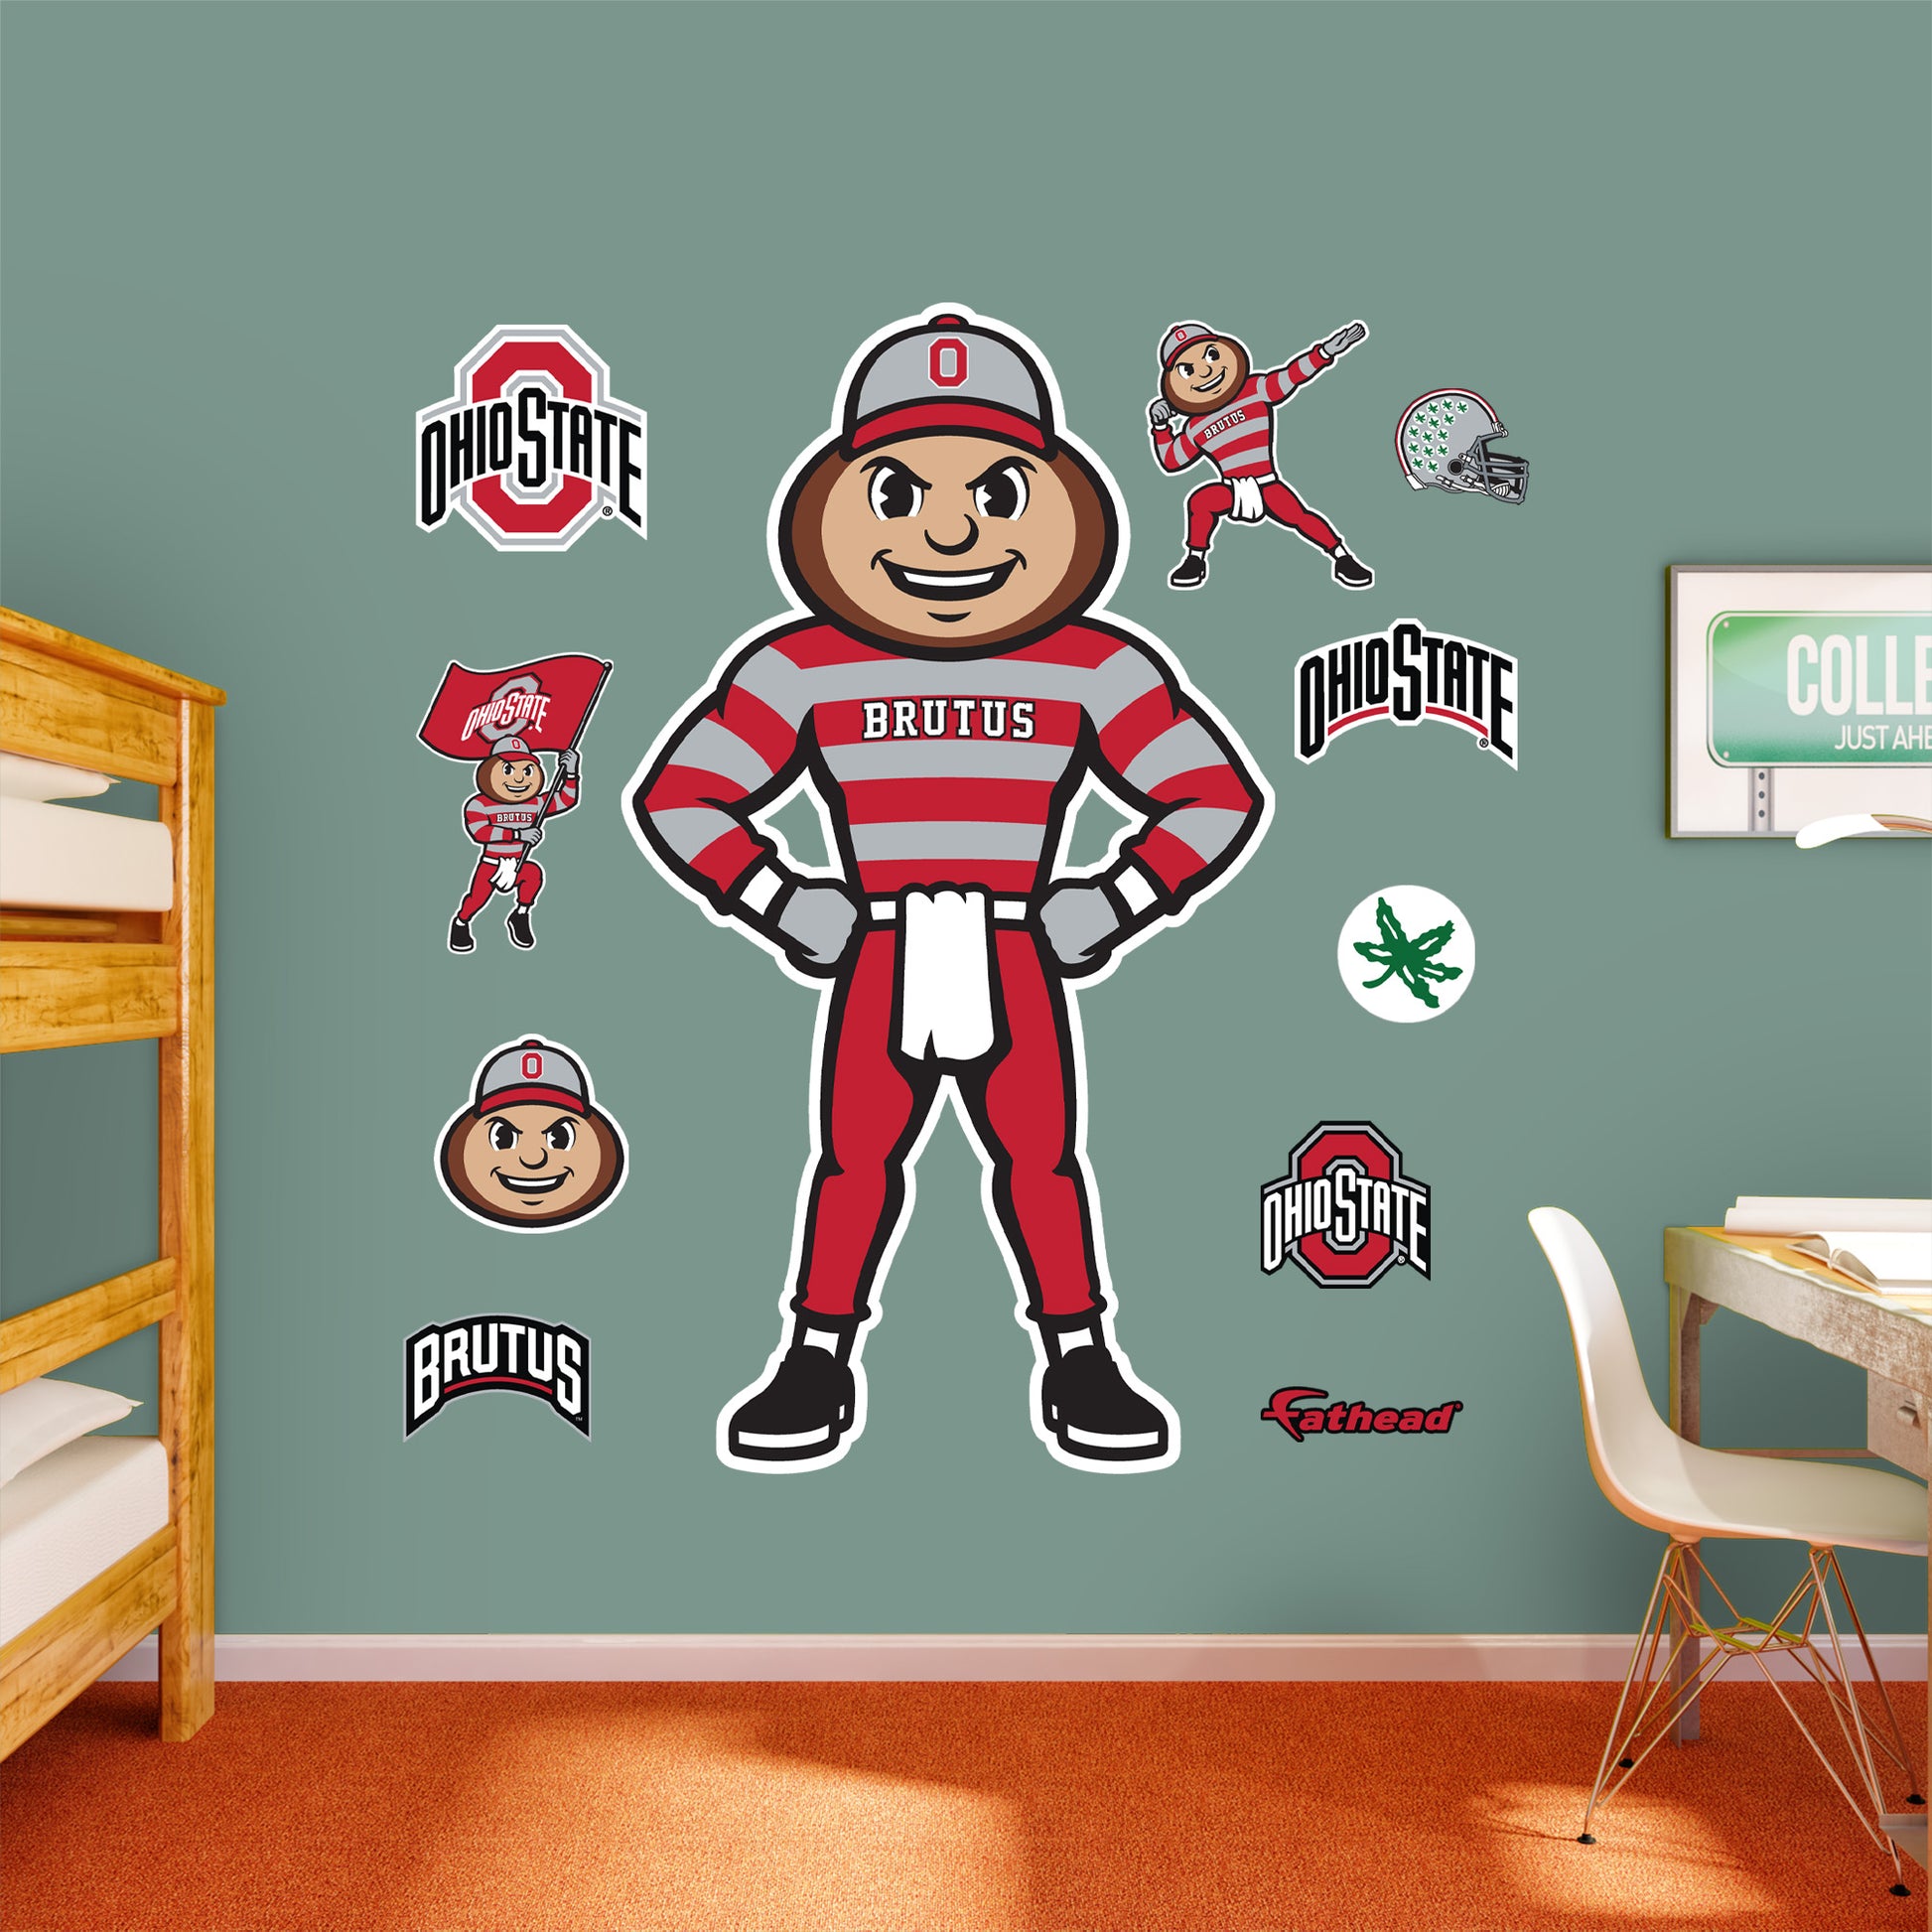 Life-Size Mascot Character +10 Decals  (54"W x 78"H) 